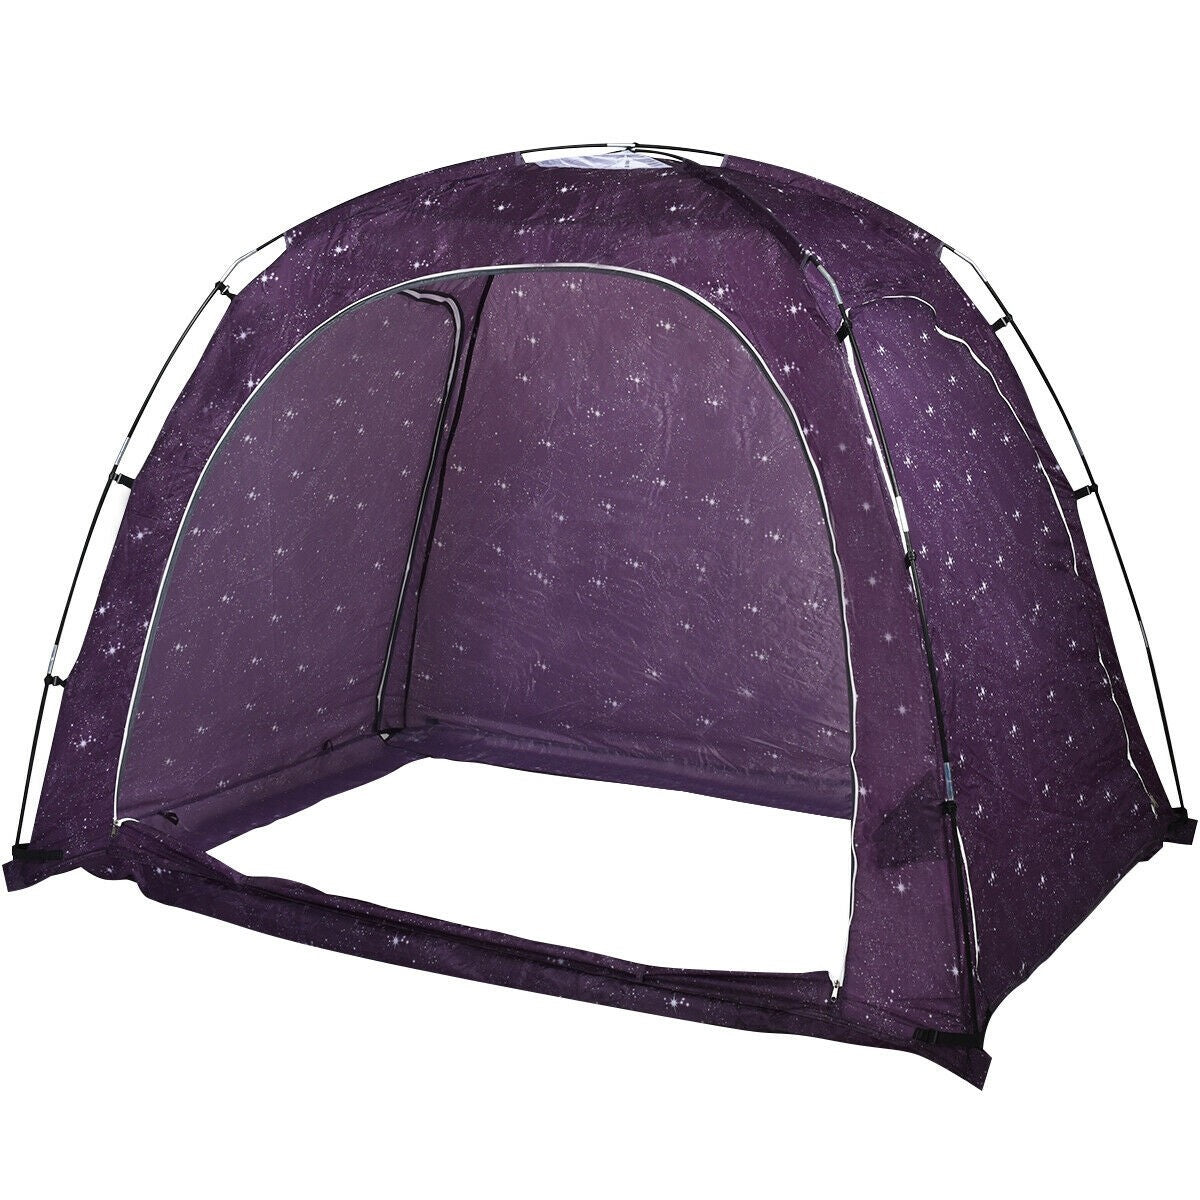 Bed Tent, Indoor Privacy Play Tent